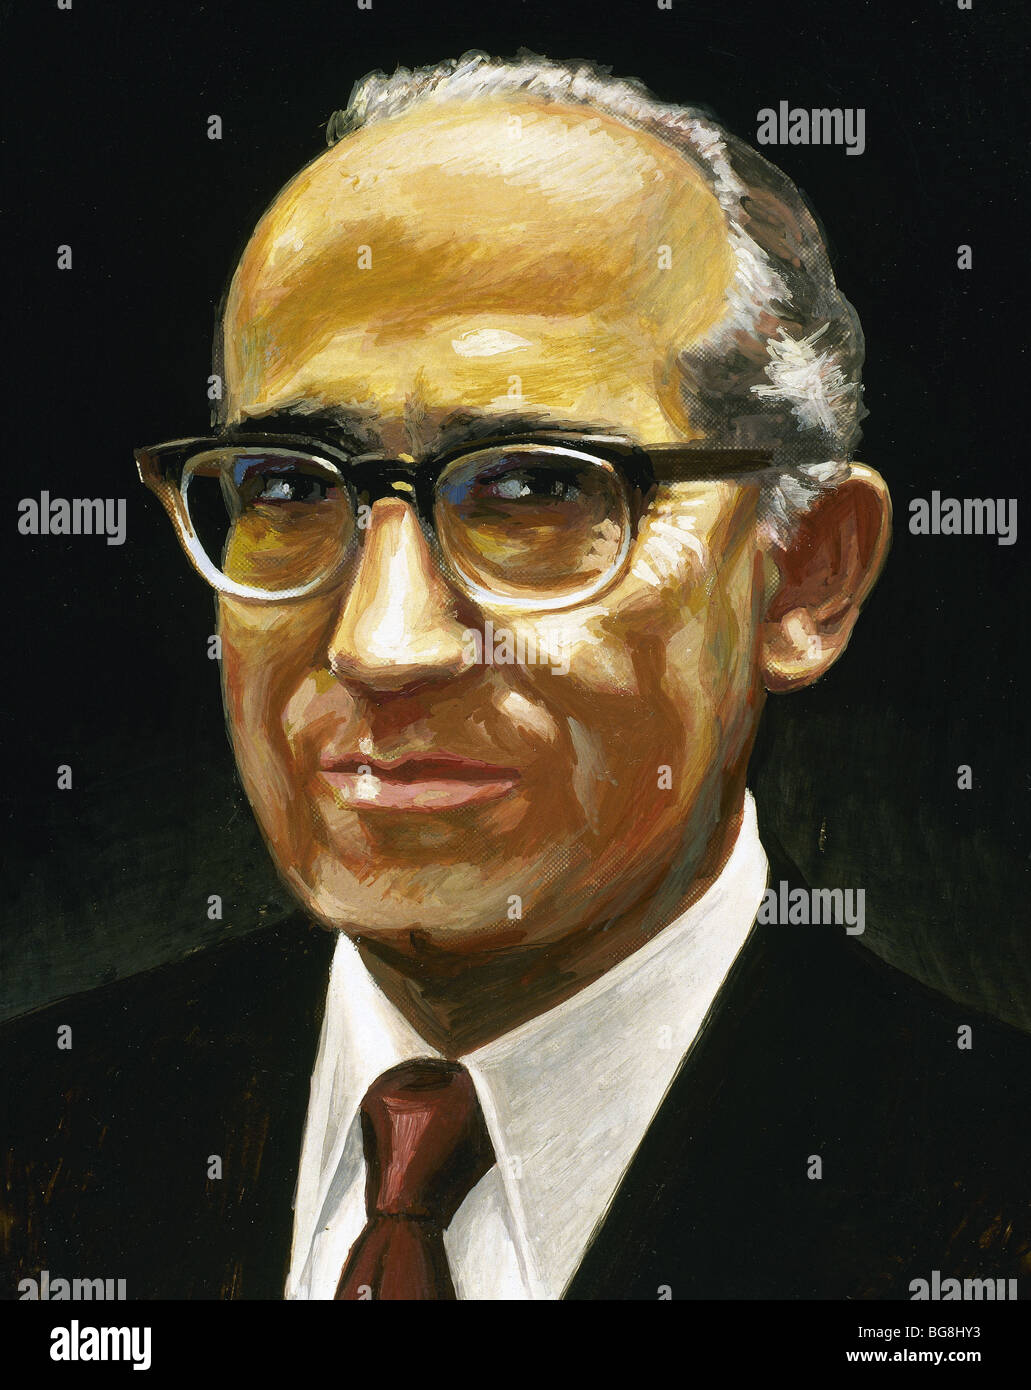 SALK, Jonas (1914-1995). American medical researcher and virologist, discoverer of the polio vaccine in 1954. Stock Photo